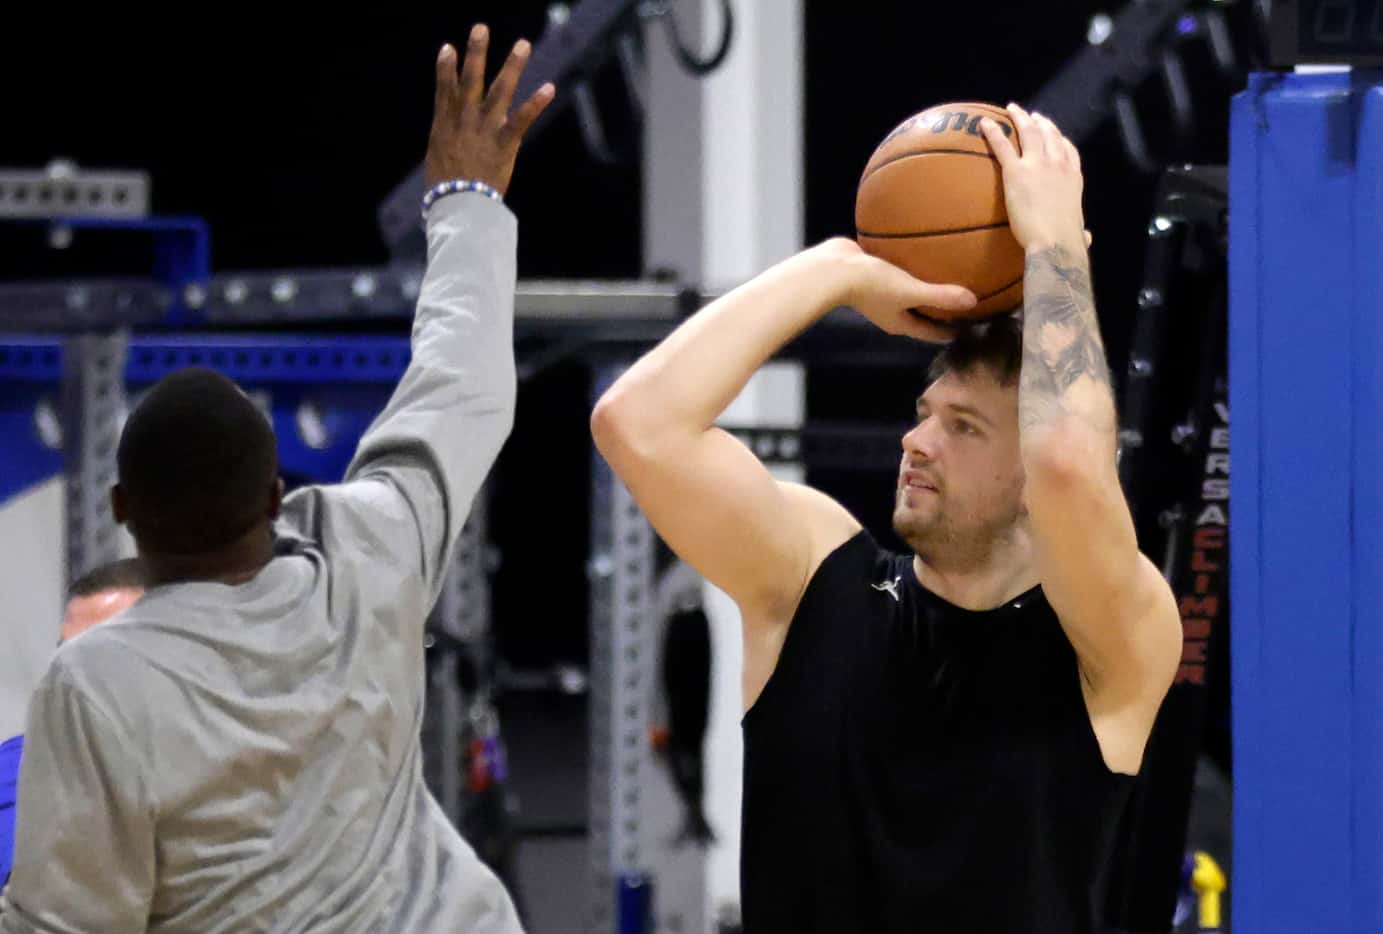 Dallas Mavericks guards Luka Doncic (right) practiced shooting 3-pinters at their practice...